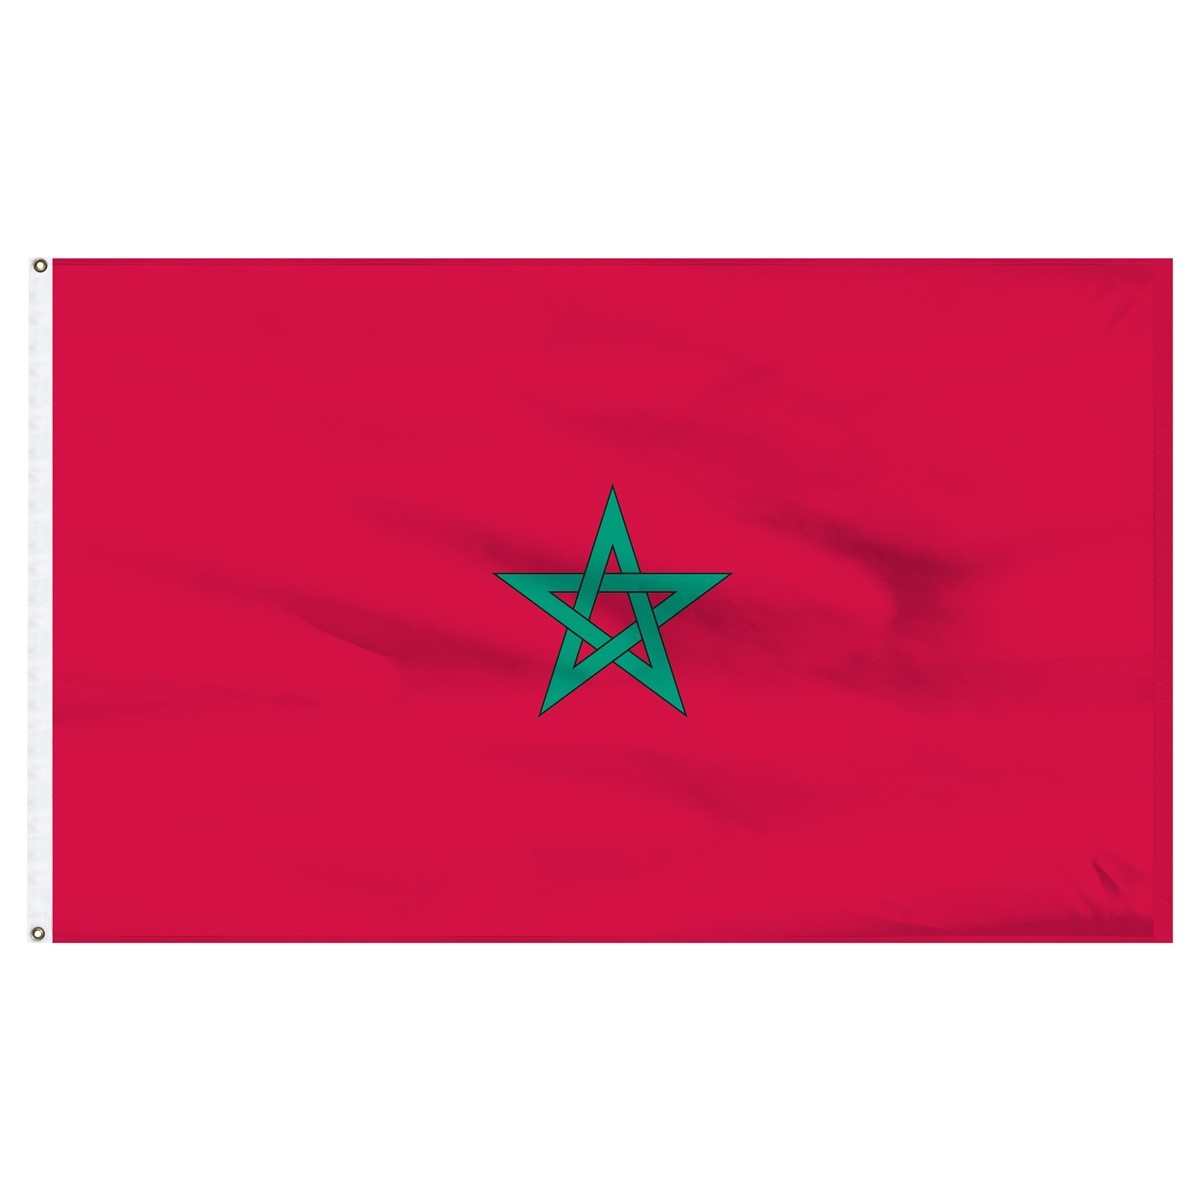 Morocco flags for sale